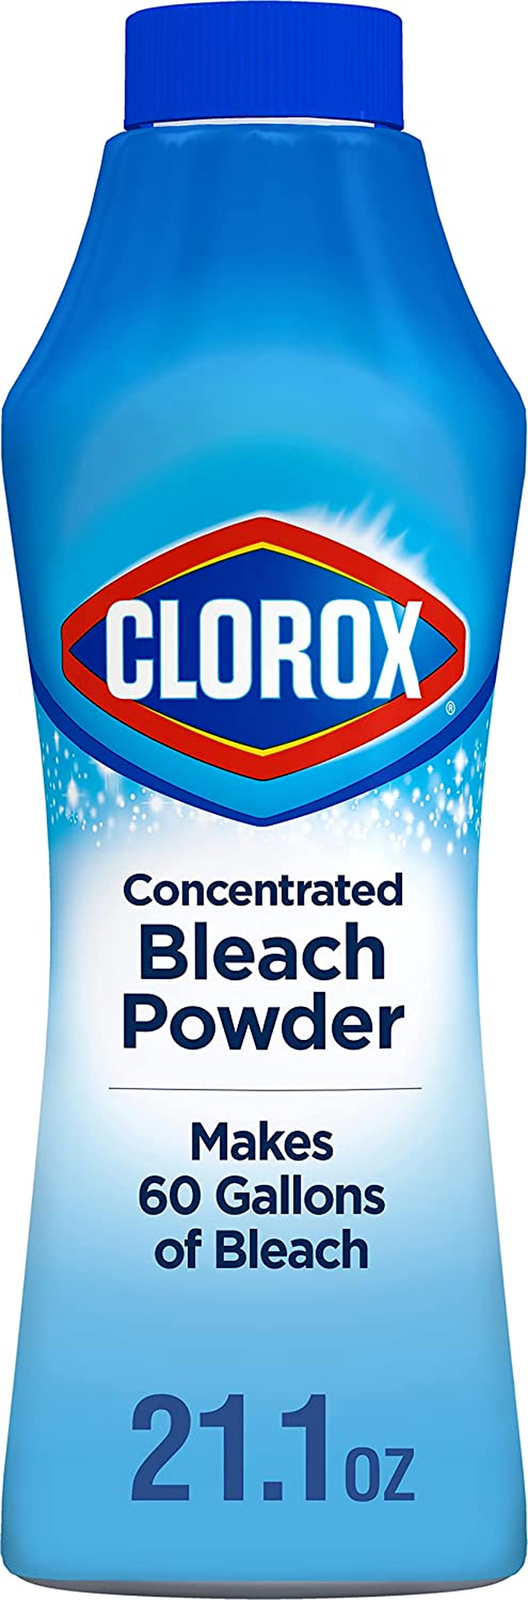 Clorox Concentrated Bleach Powder - 21.1 Oz. (Pack of 1) - $35.99